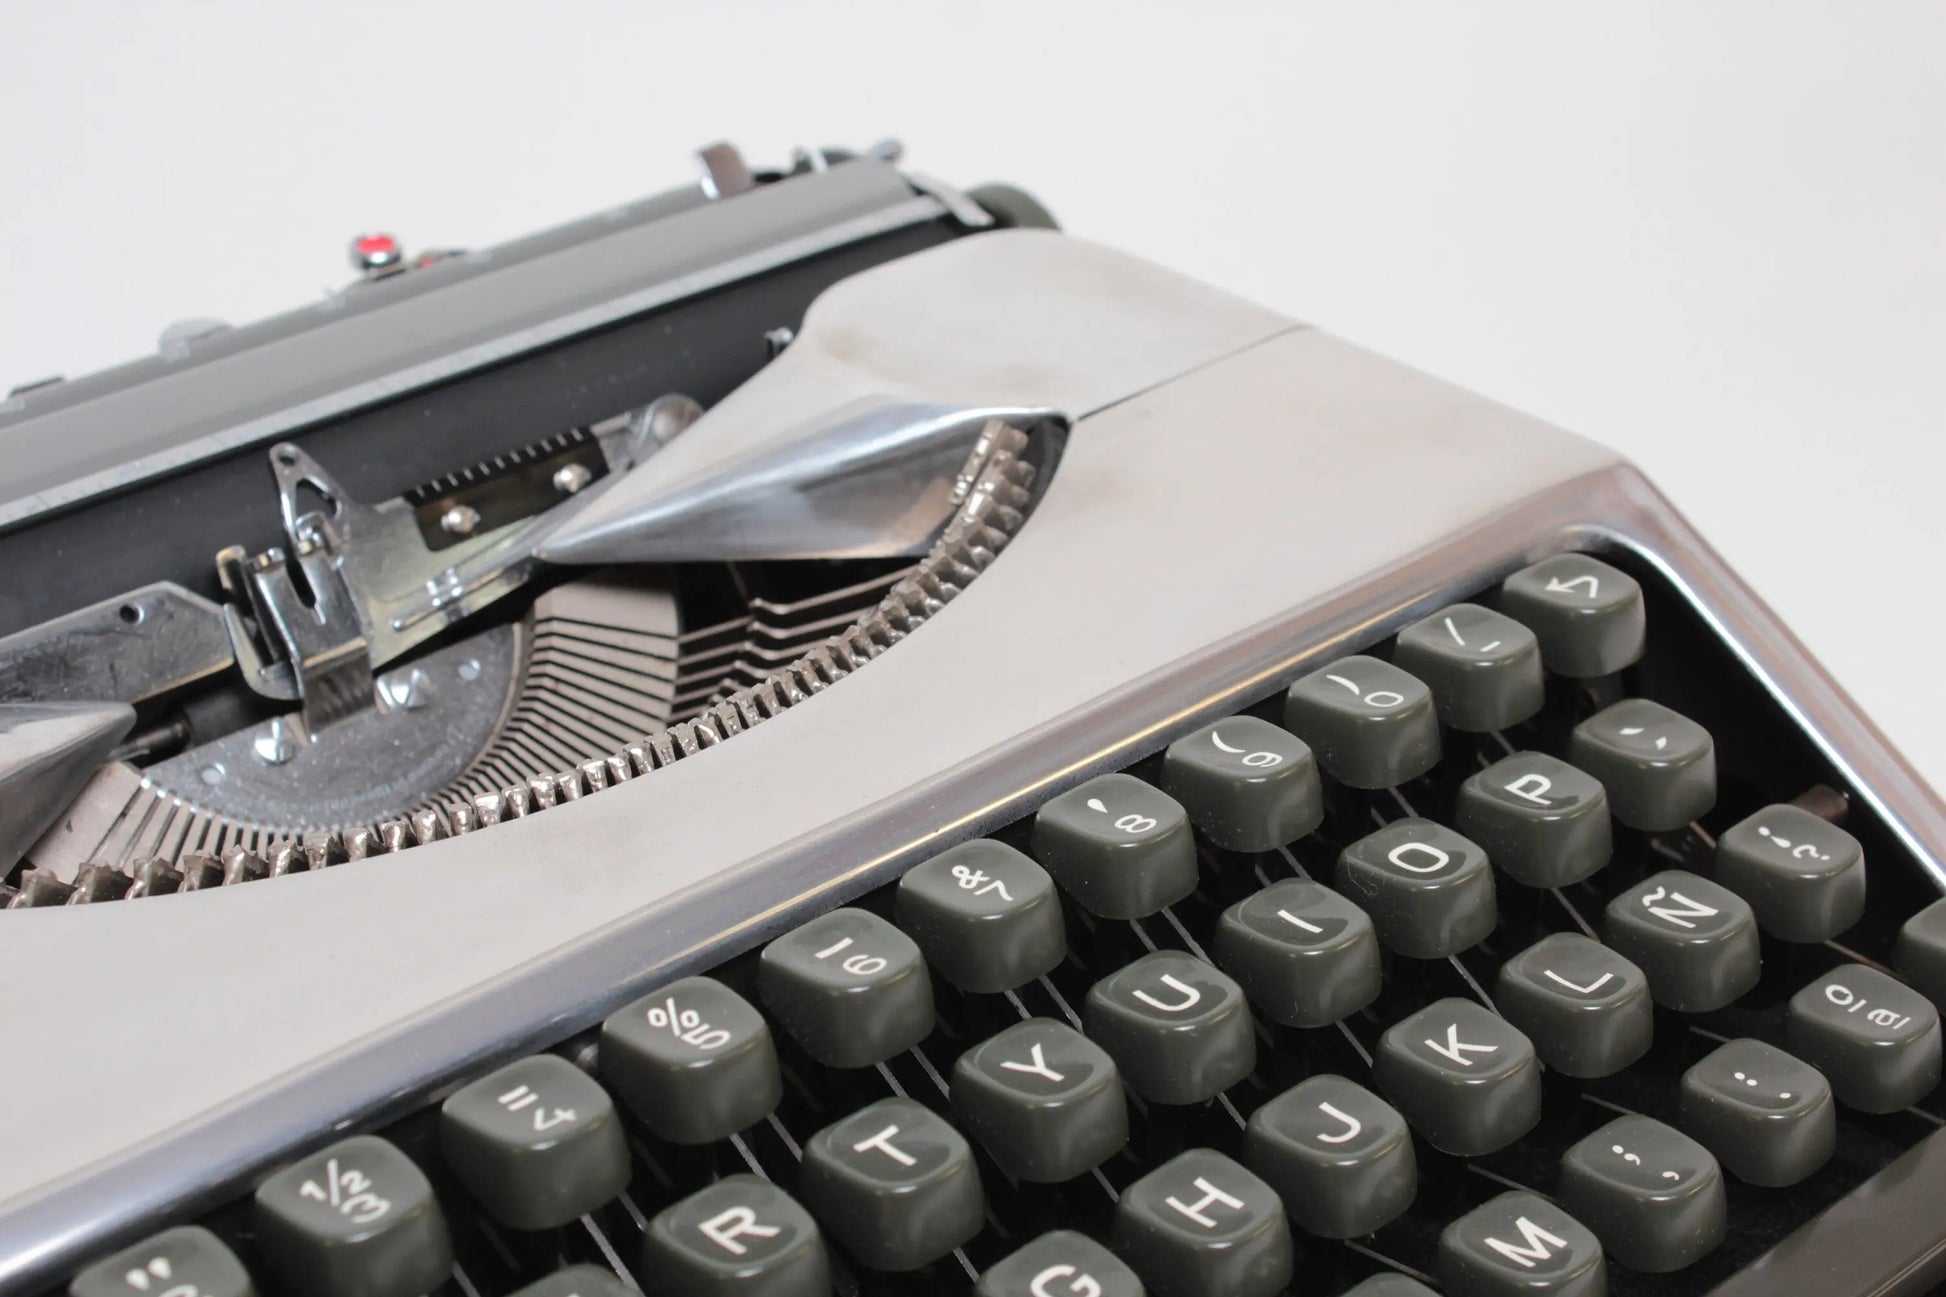 SALE! - Limited Edition Hermes Baby Polished Silver Typewriter, Vintage, Professionally Serviced - ElGranero Typewriter.Company